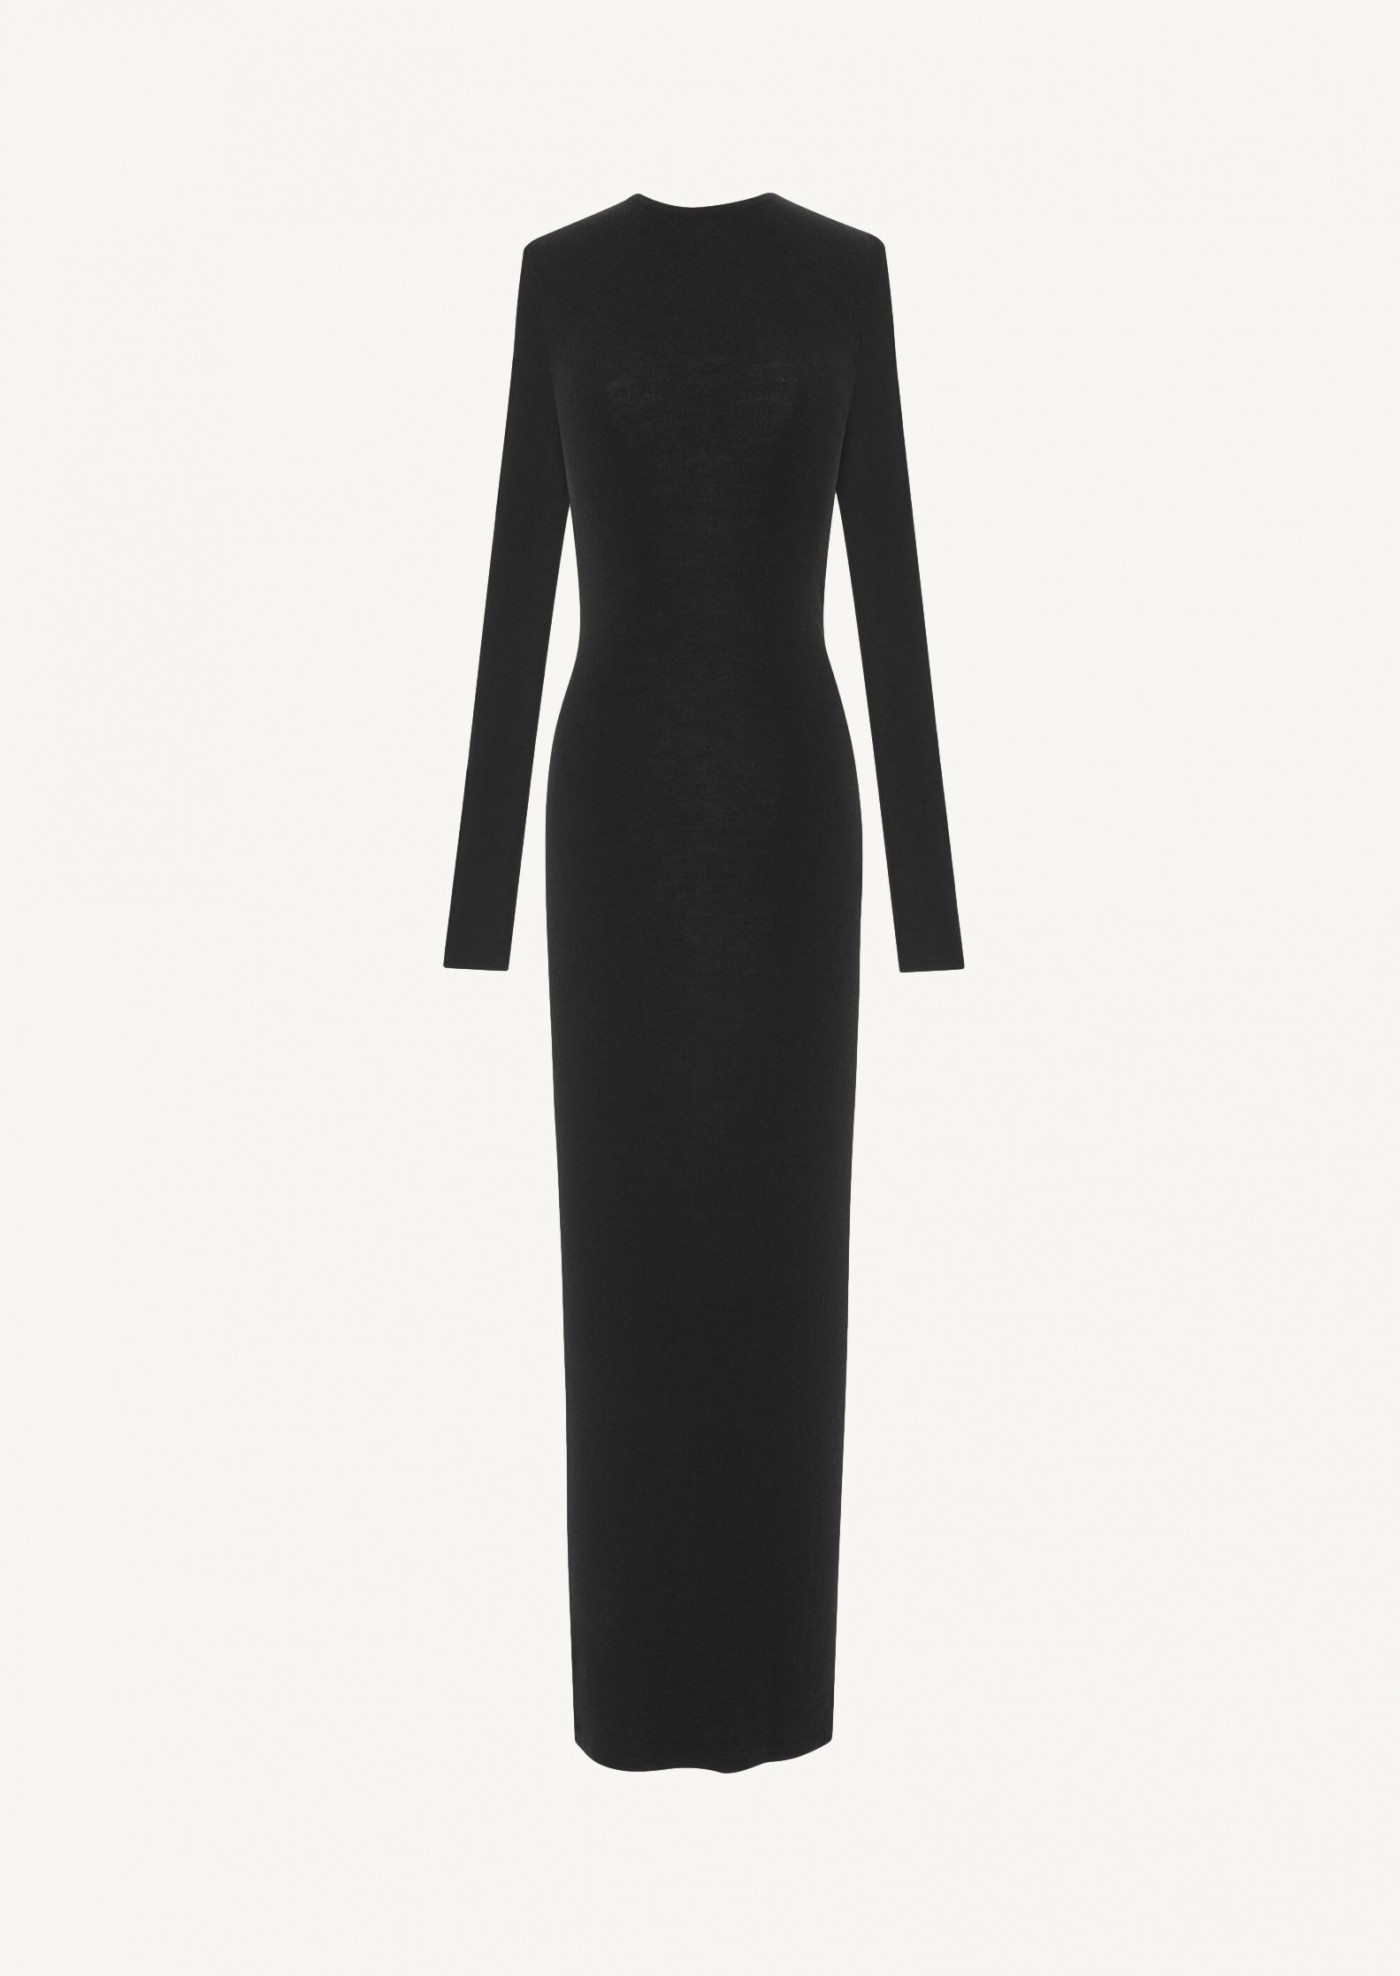 Dress with bare back in cashmere, wool and silk